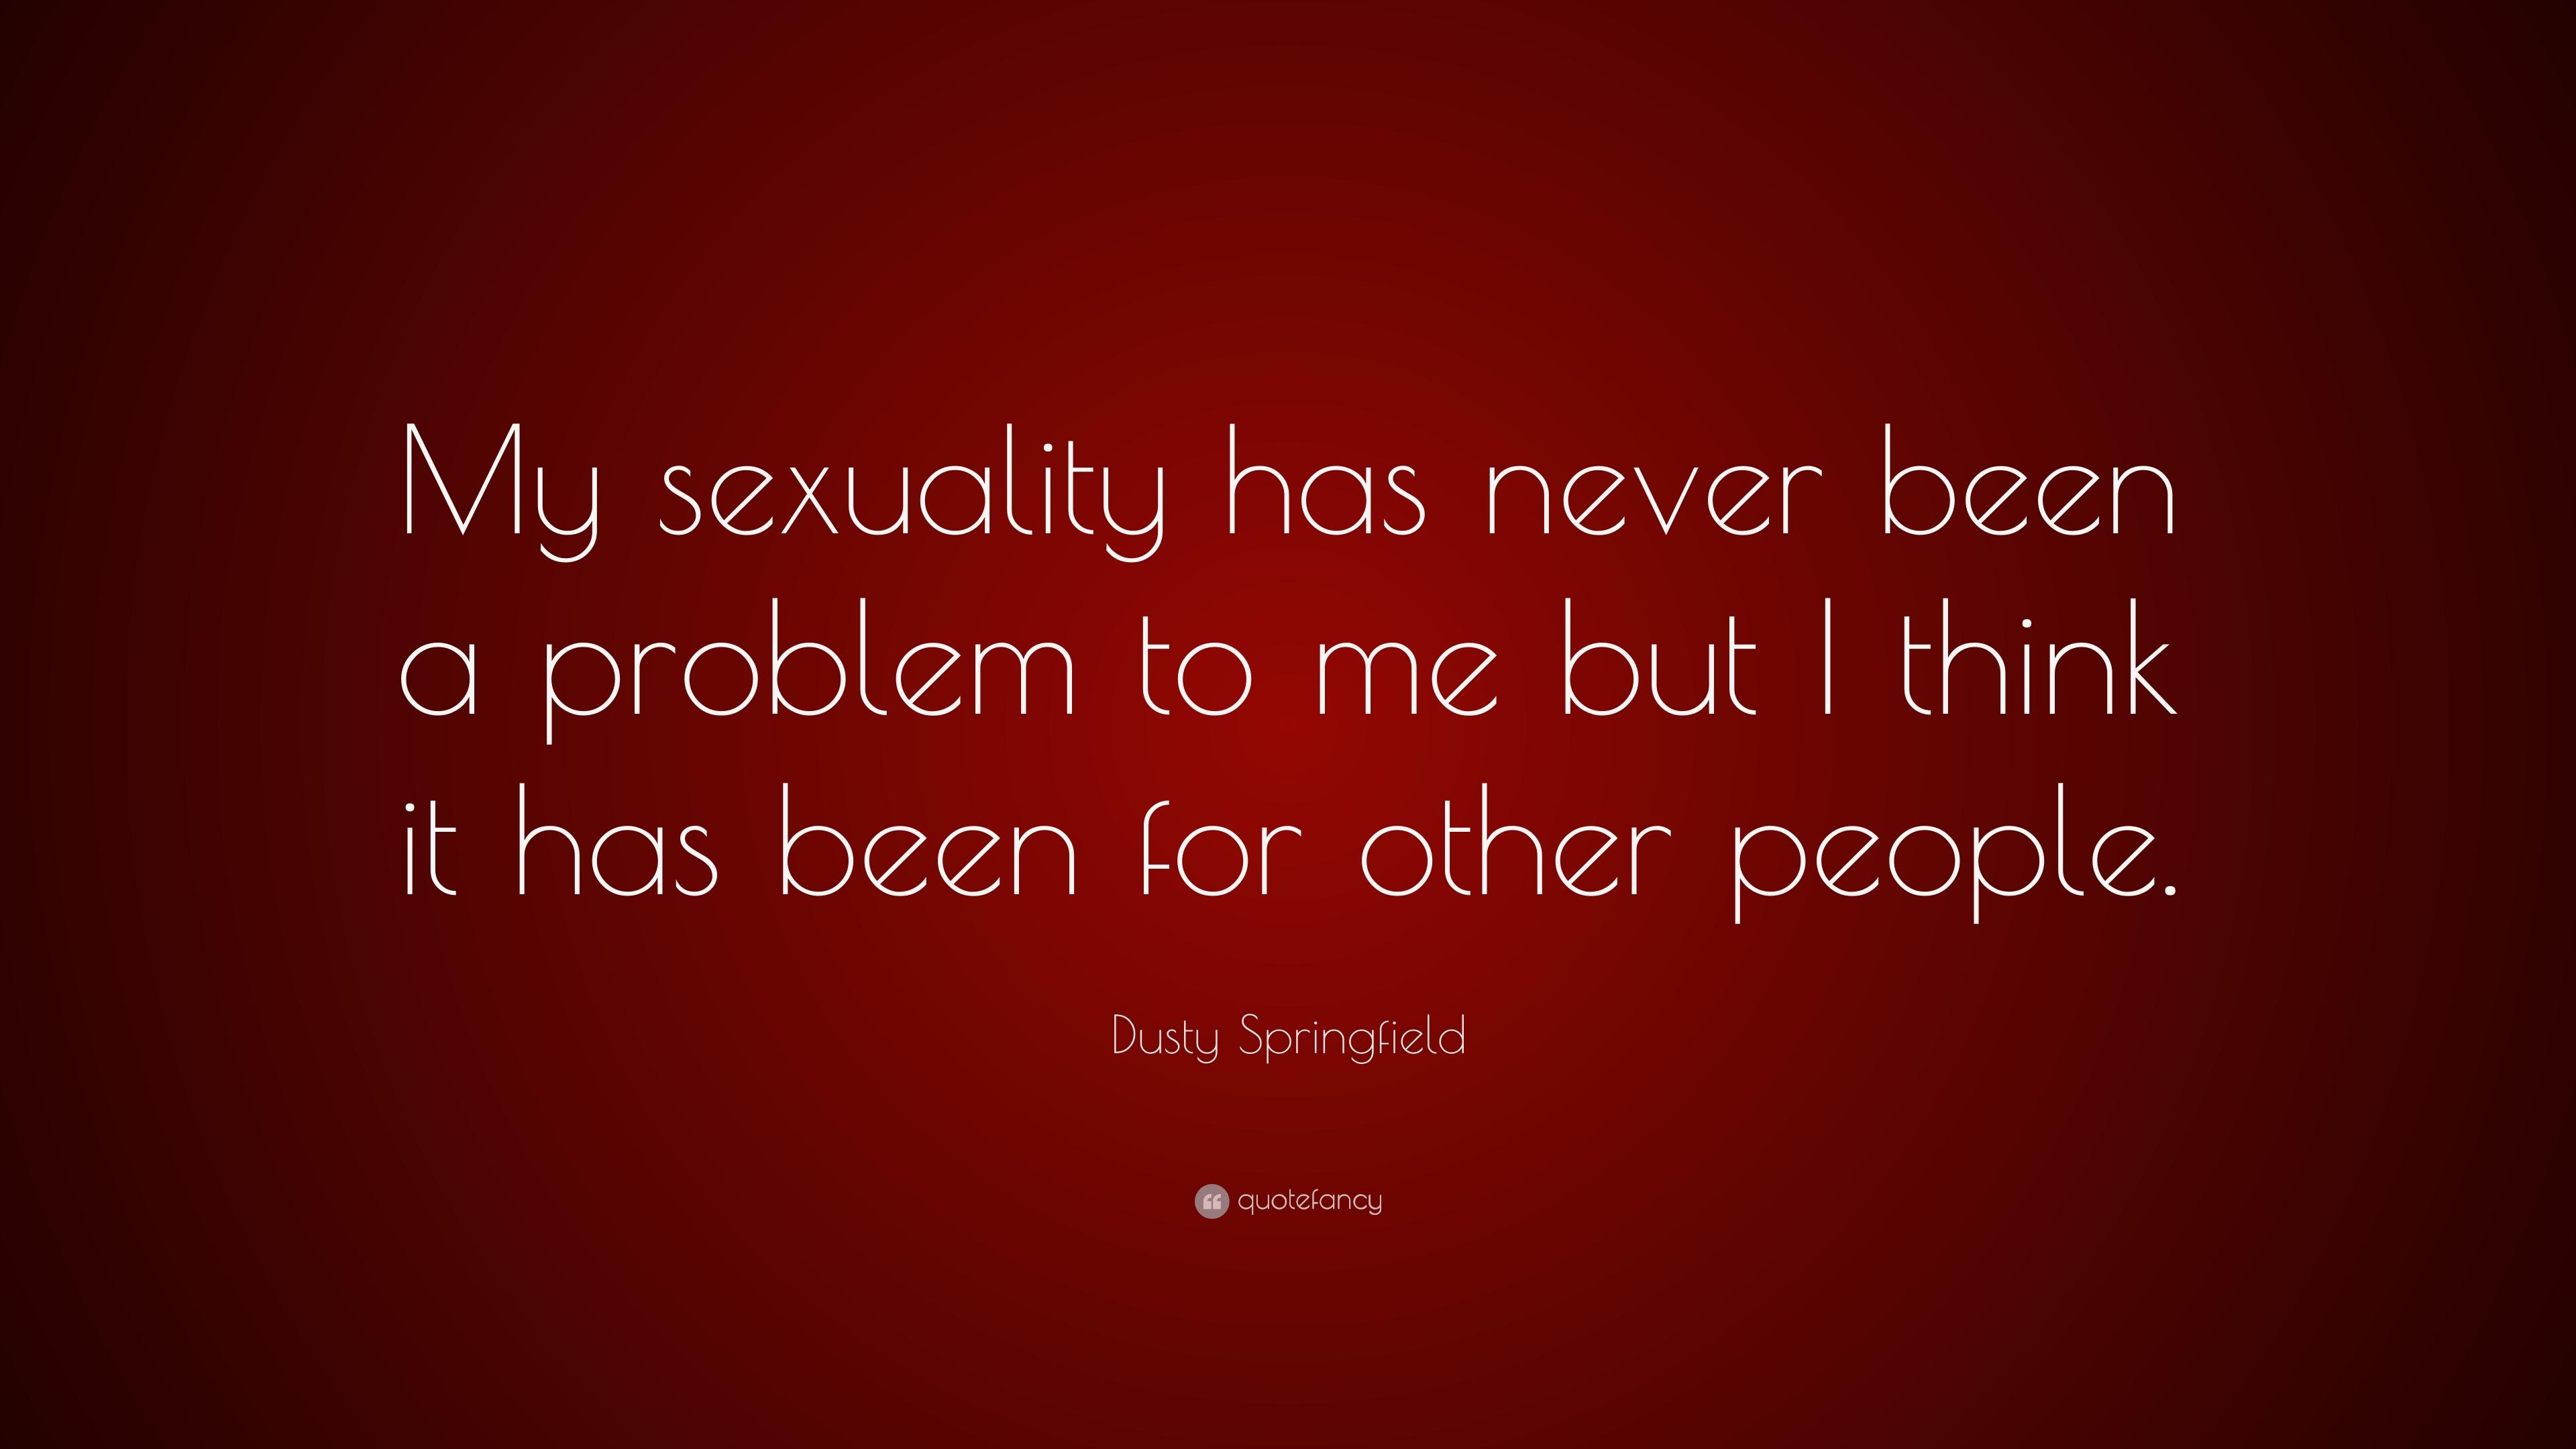 Dusty Springfield Quote: “My sexuality has never been a problem to